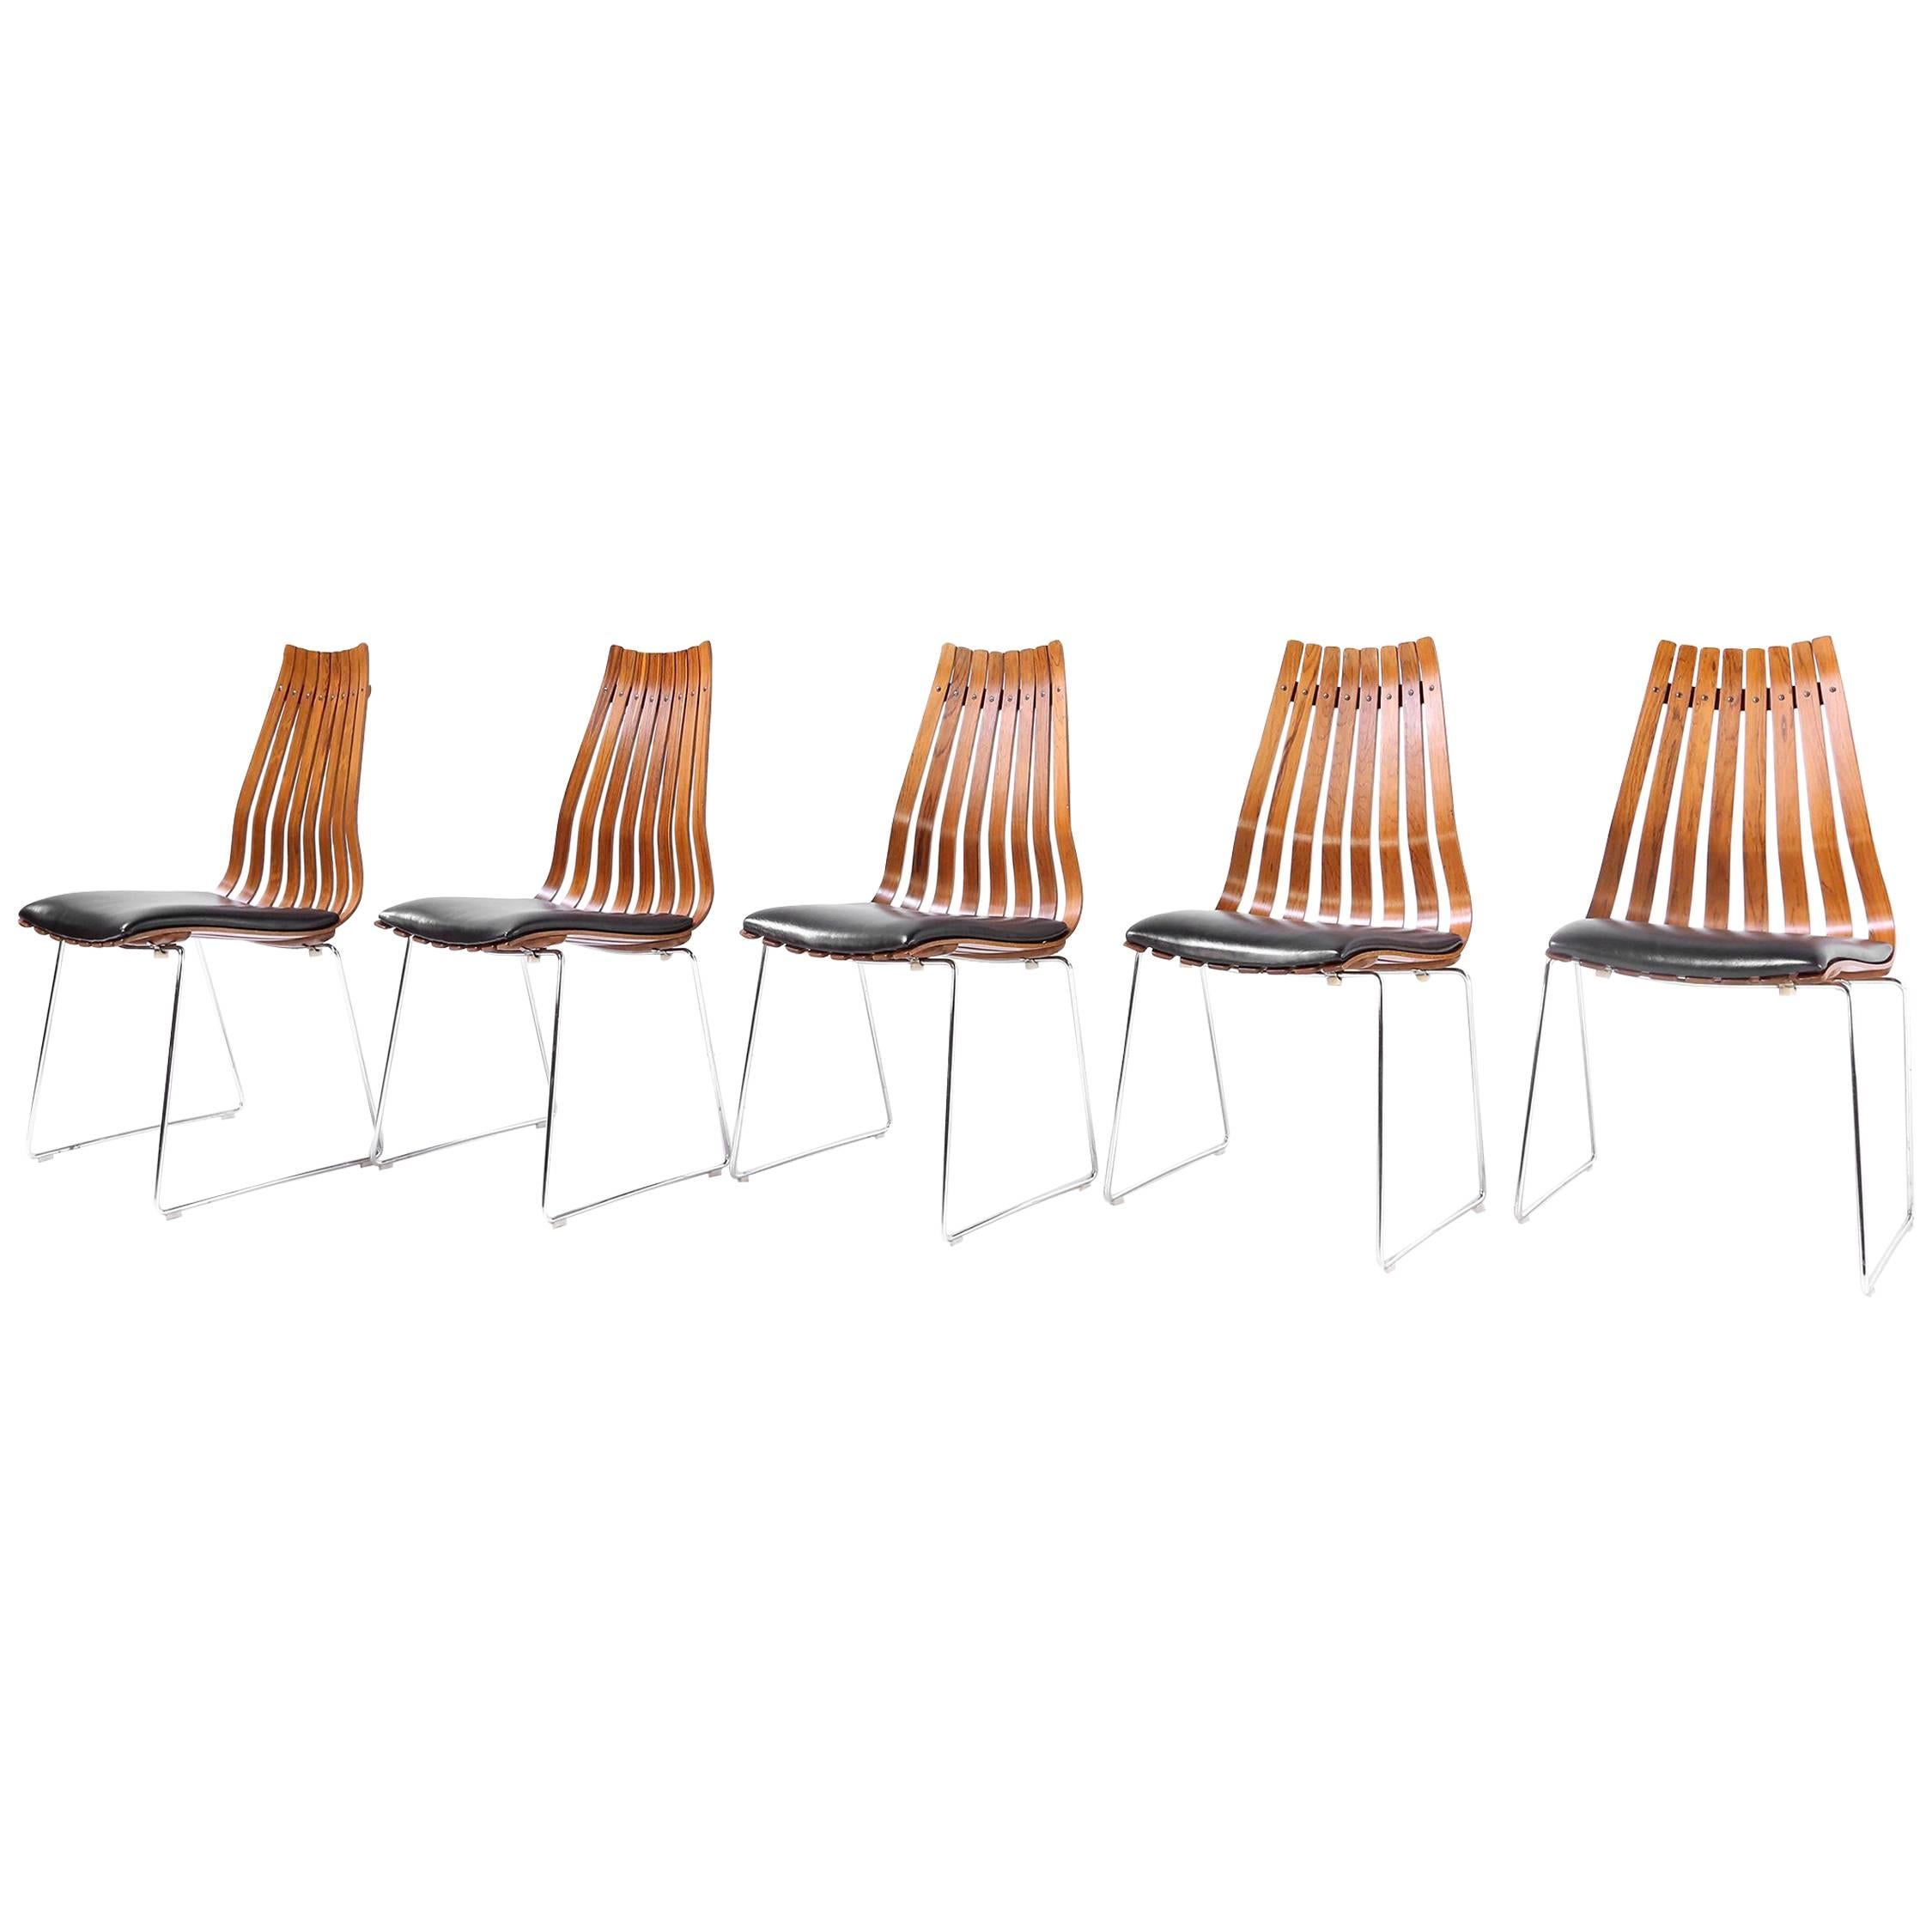 Five Hans Brattrud Rosewood Scandia Chairs Produced by Hove Mobler Norway For Sale